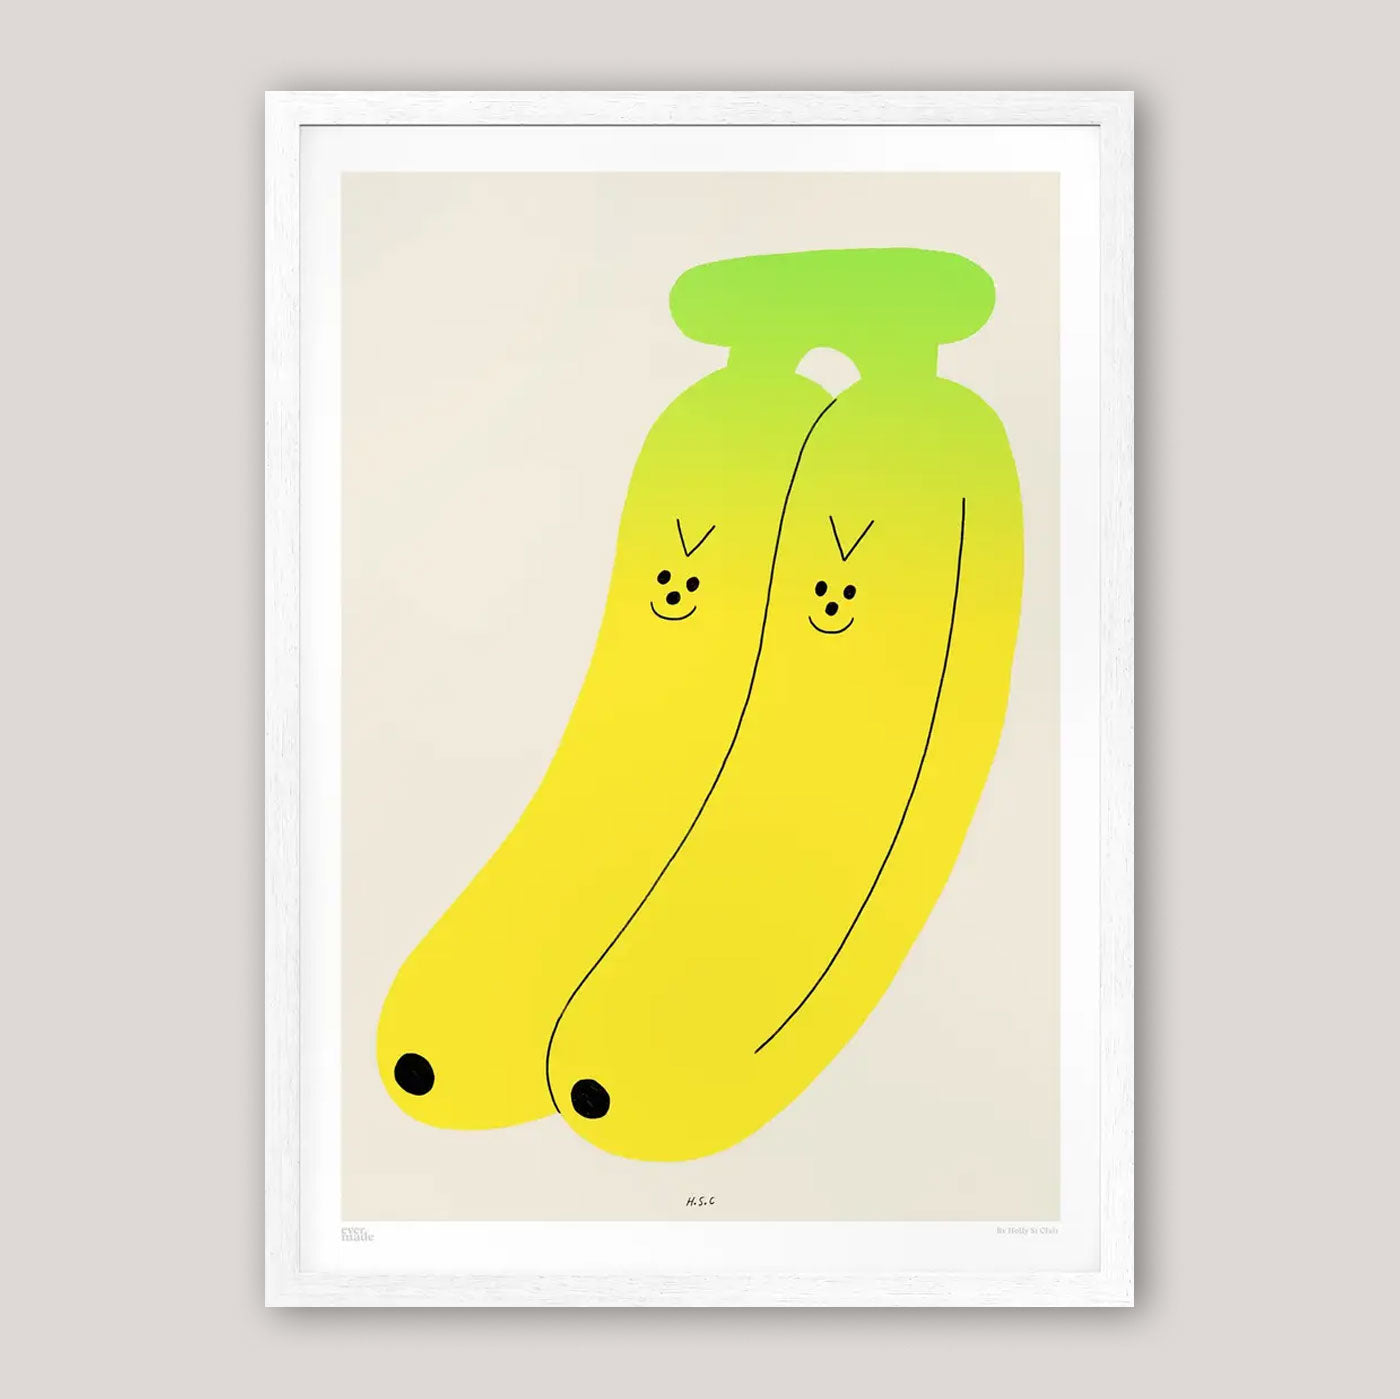 Holly St Clair for Evermade | 'Bad Bunch' A3 Print